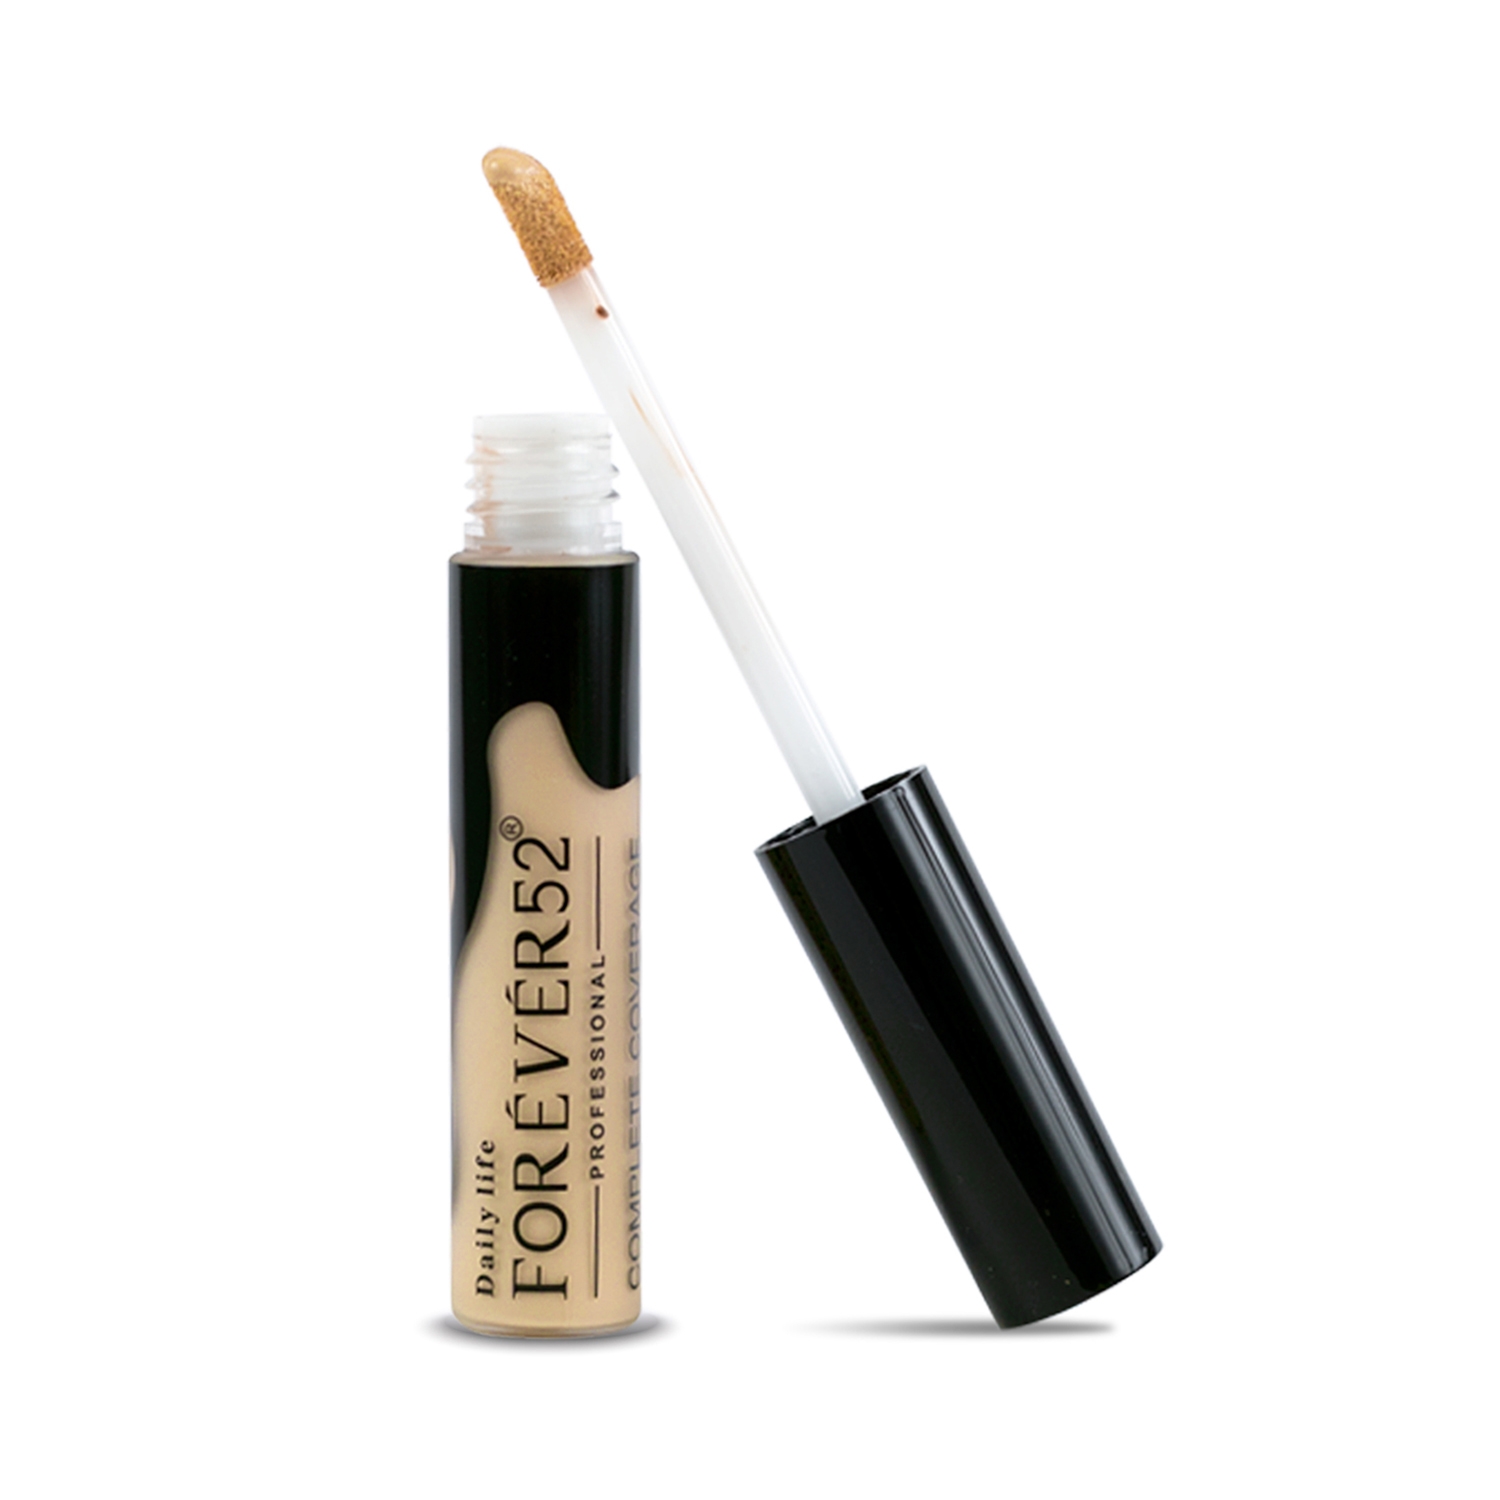 Daily Life Forever52 | Daily Life Forever52 Complete Coverage Concealer COV001 - Vanilla (10g)